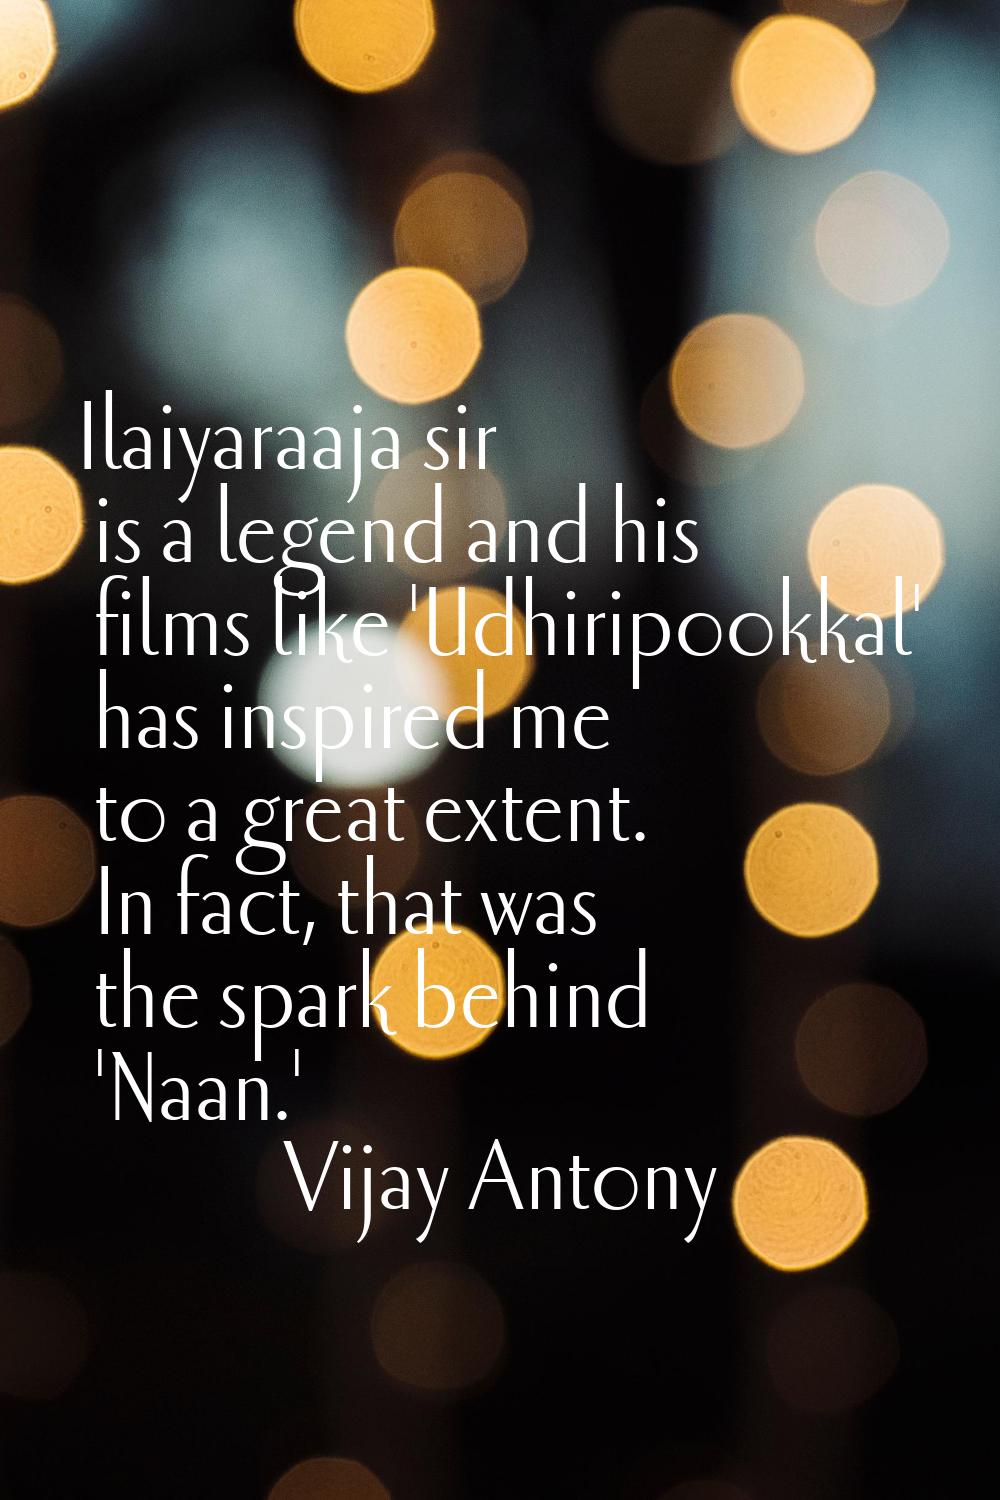 Ilaiyaraaja sir is a legend and his films like 'Udhiripookkal' has inspired me to a great extent. I